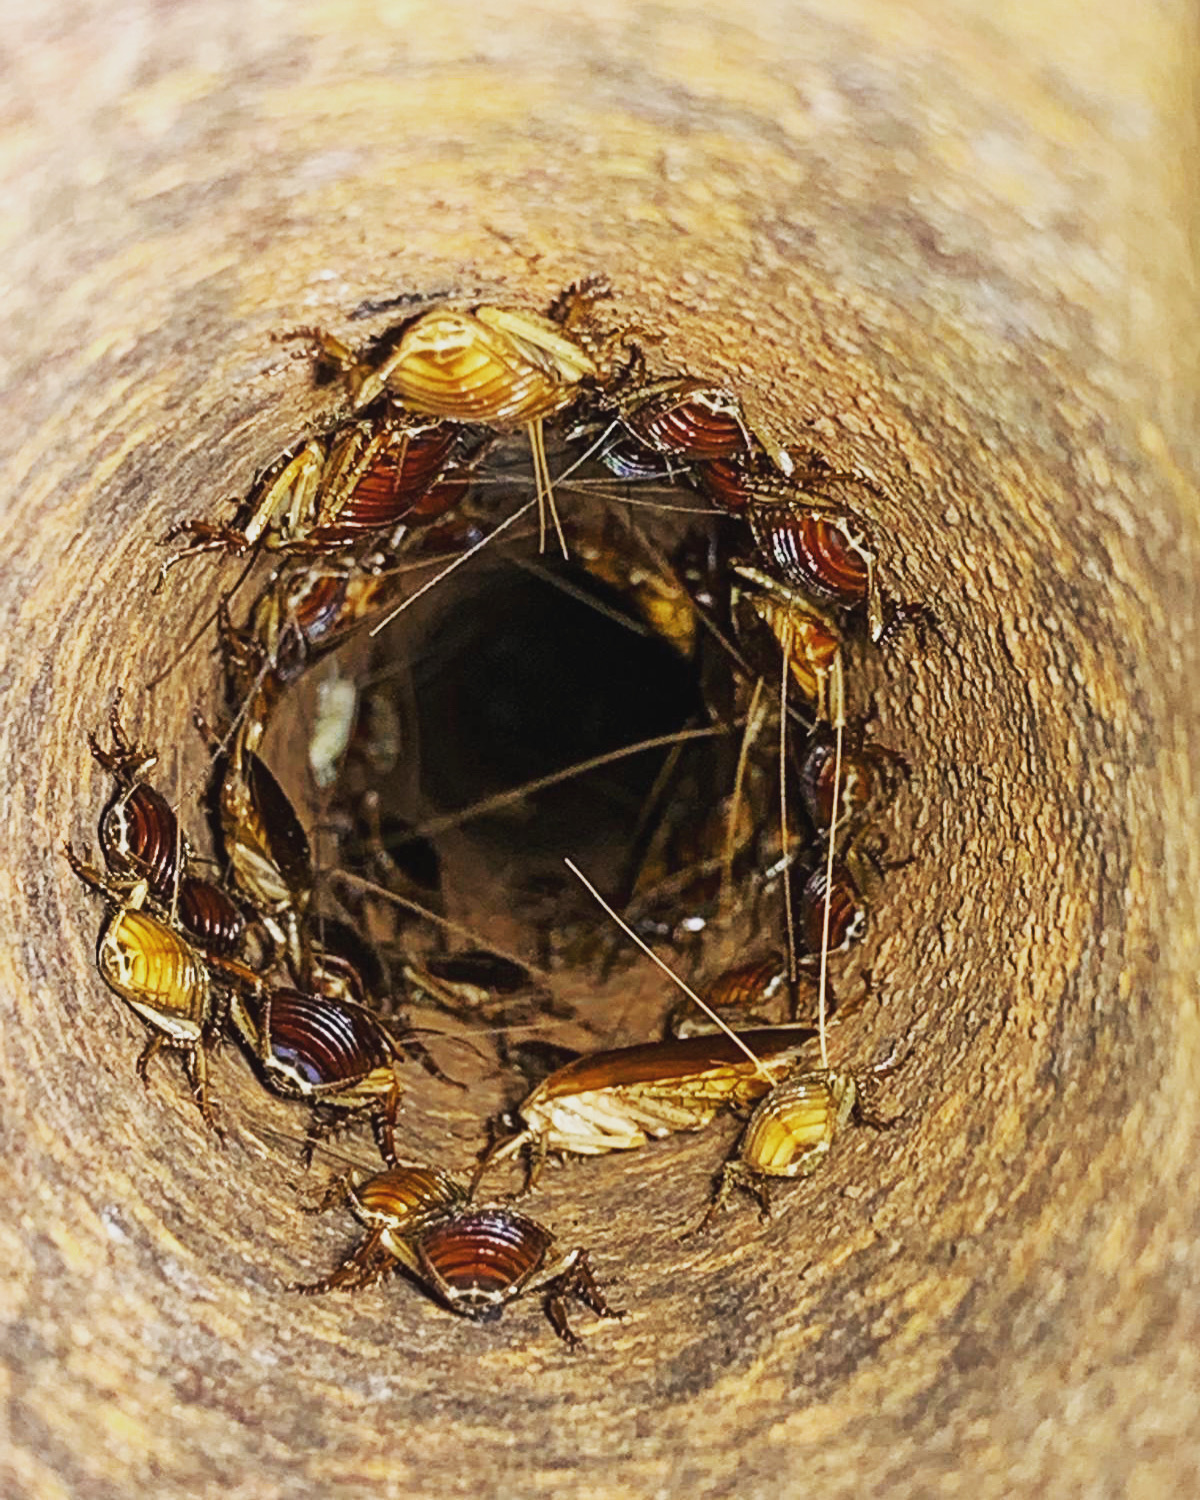 Cockroaches in drain pipe